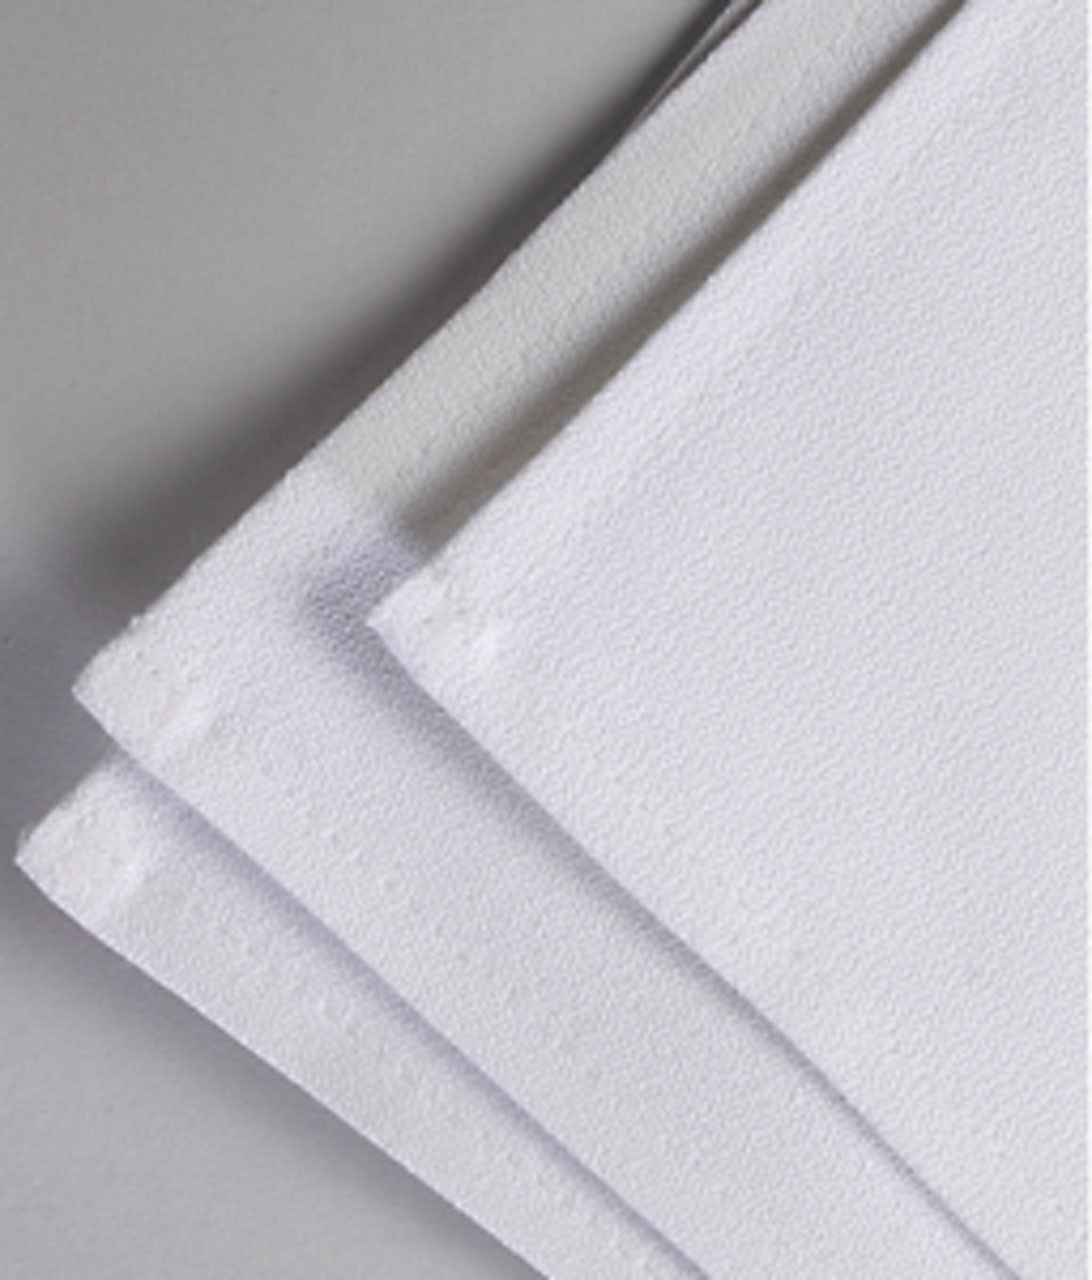 What are cotton napkins used for?